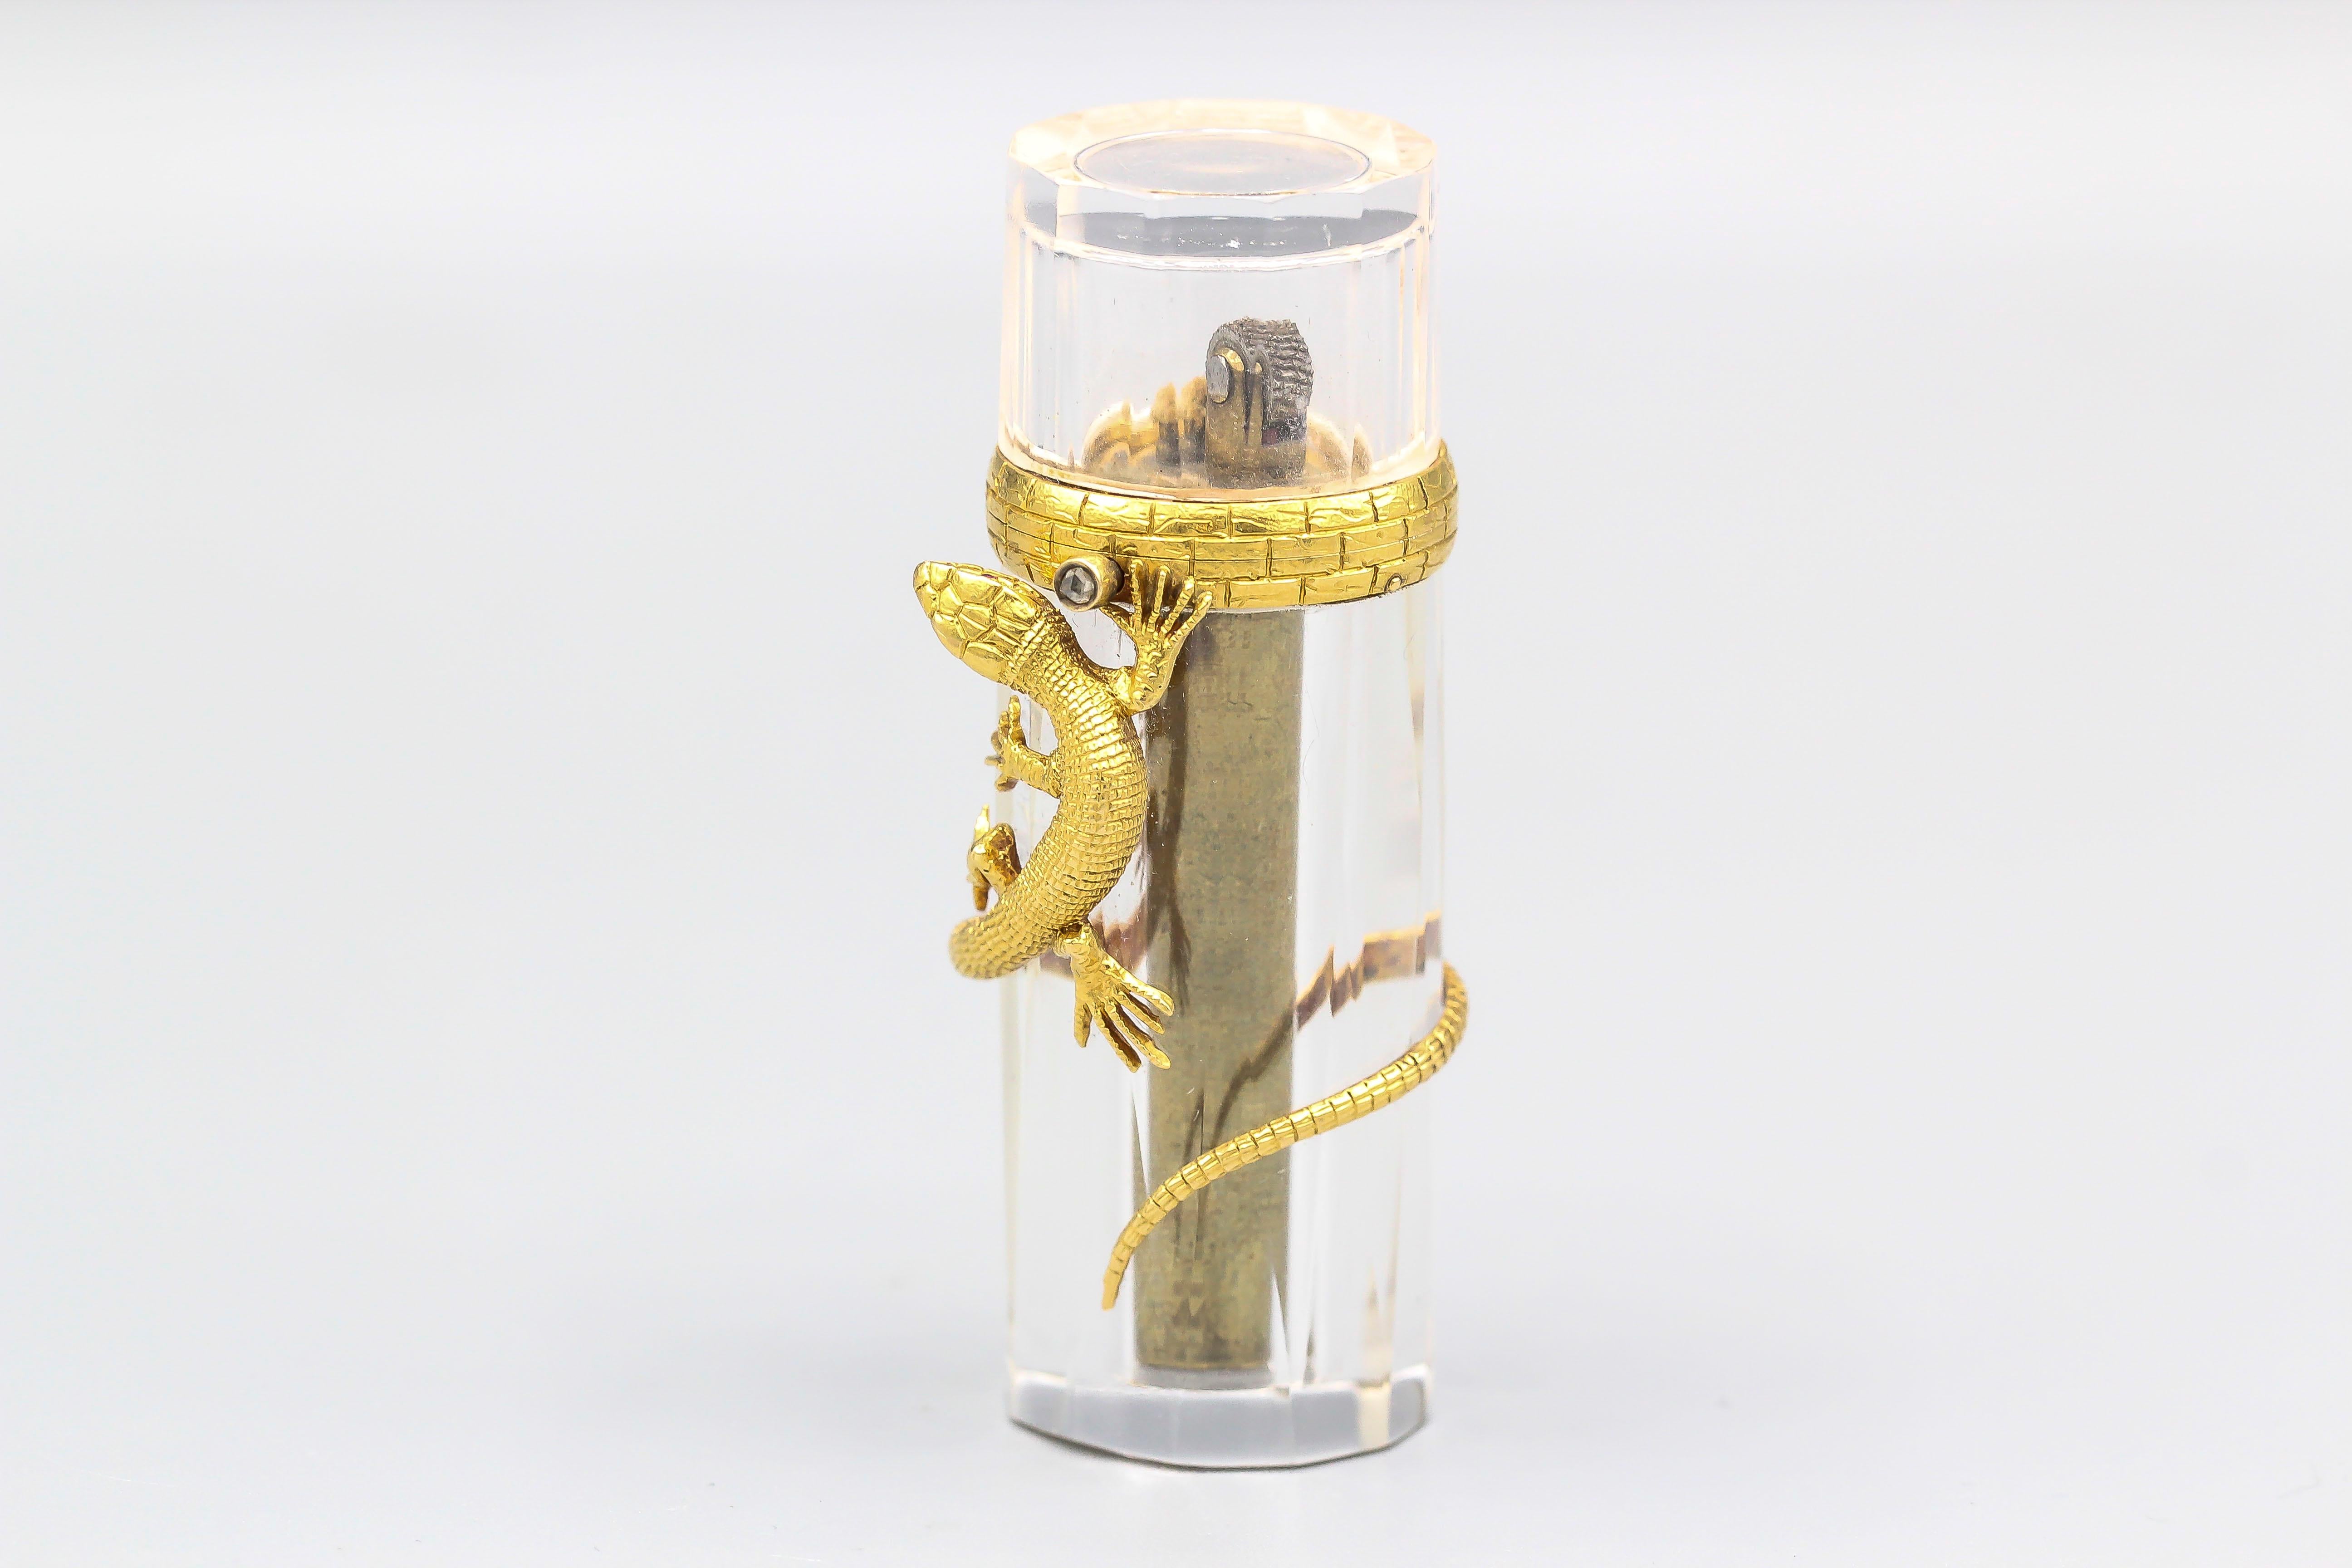 Very fine lighter of French origin, circa 1930-40s. It features a rock crystal body with a diamond on its clasp, and a posing gold lizard with ruby cabochon eyes.  Has flint and strikes well, needs lighter fluid.  Very rare and collectible. 